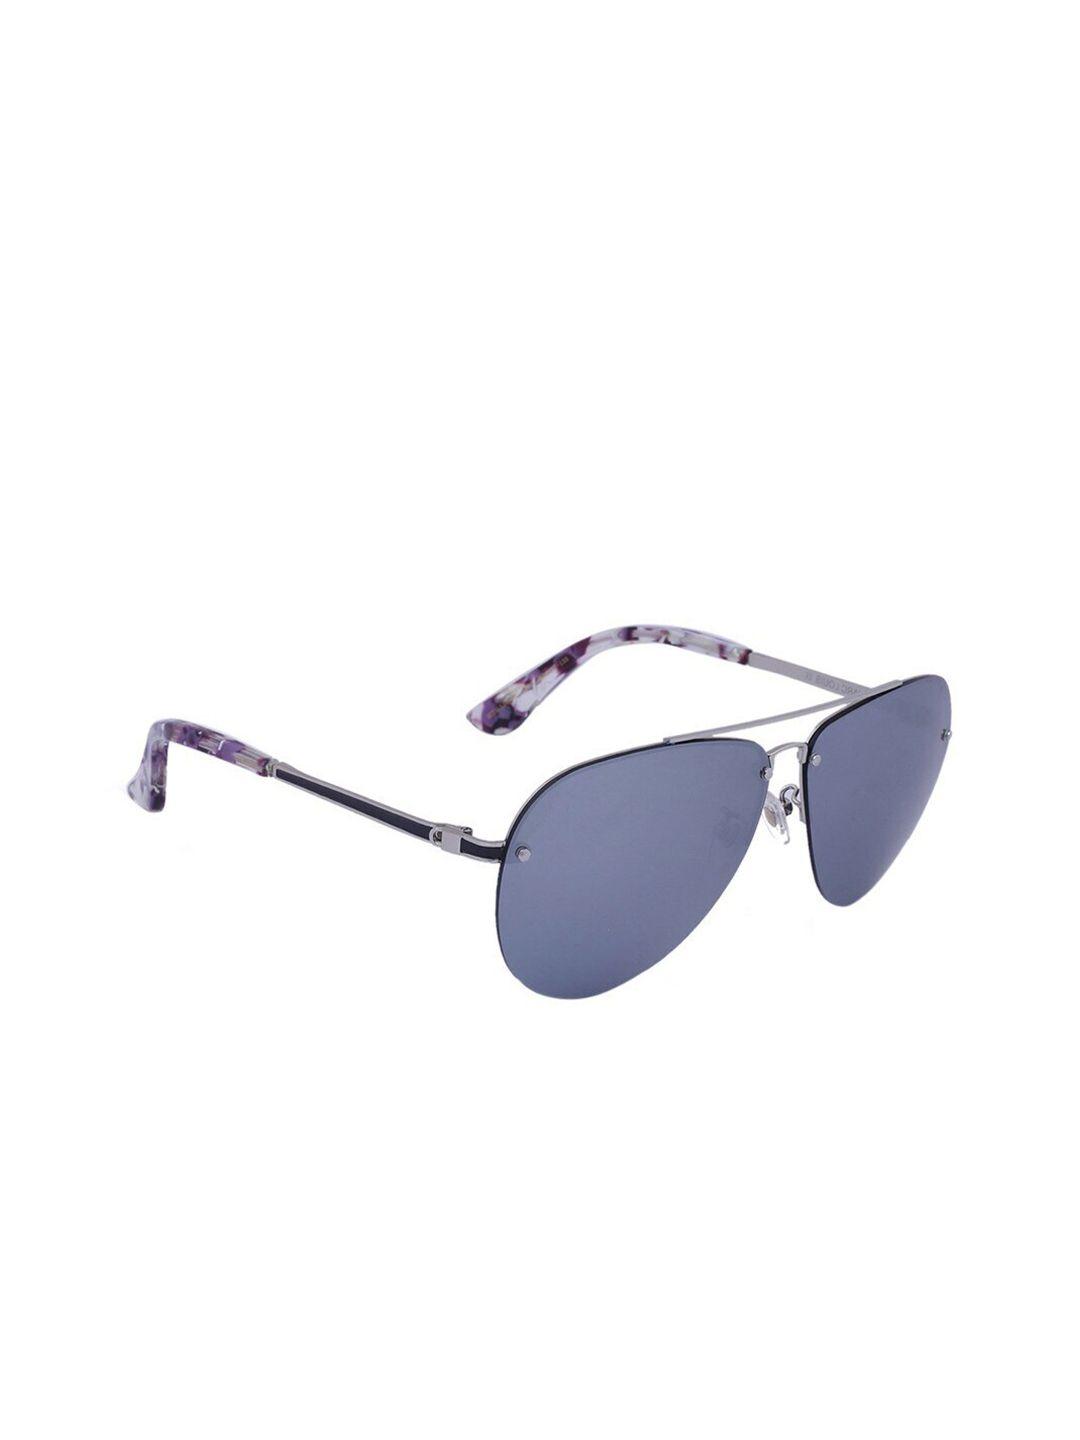 marc louis unisex mirrored lens & gunmetal-toned aviator sunglasses with uv protected lens